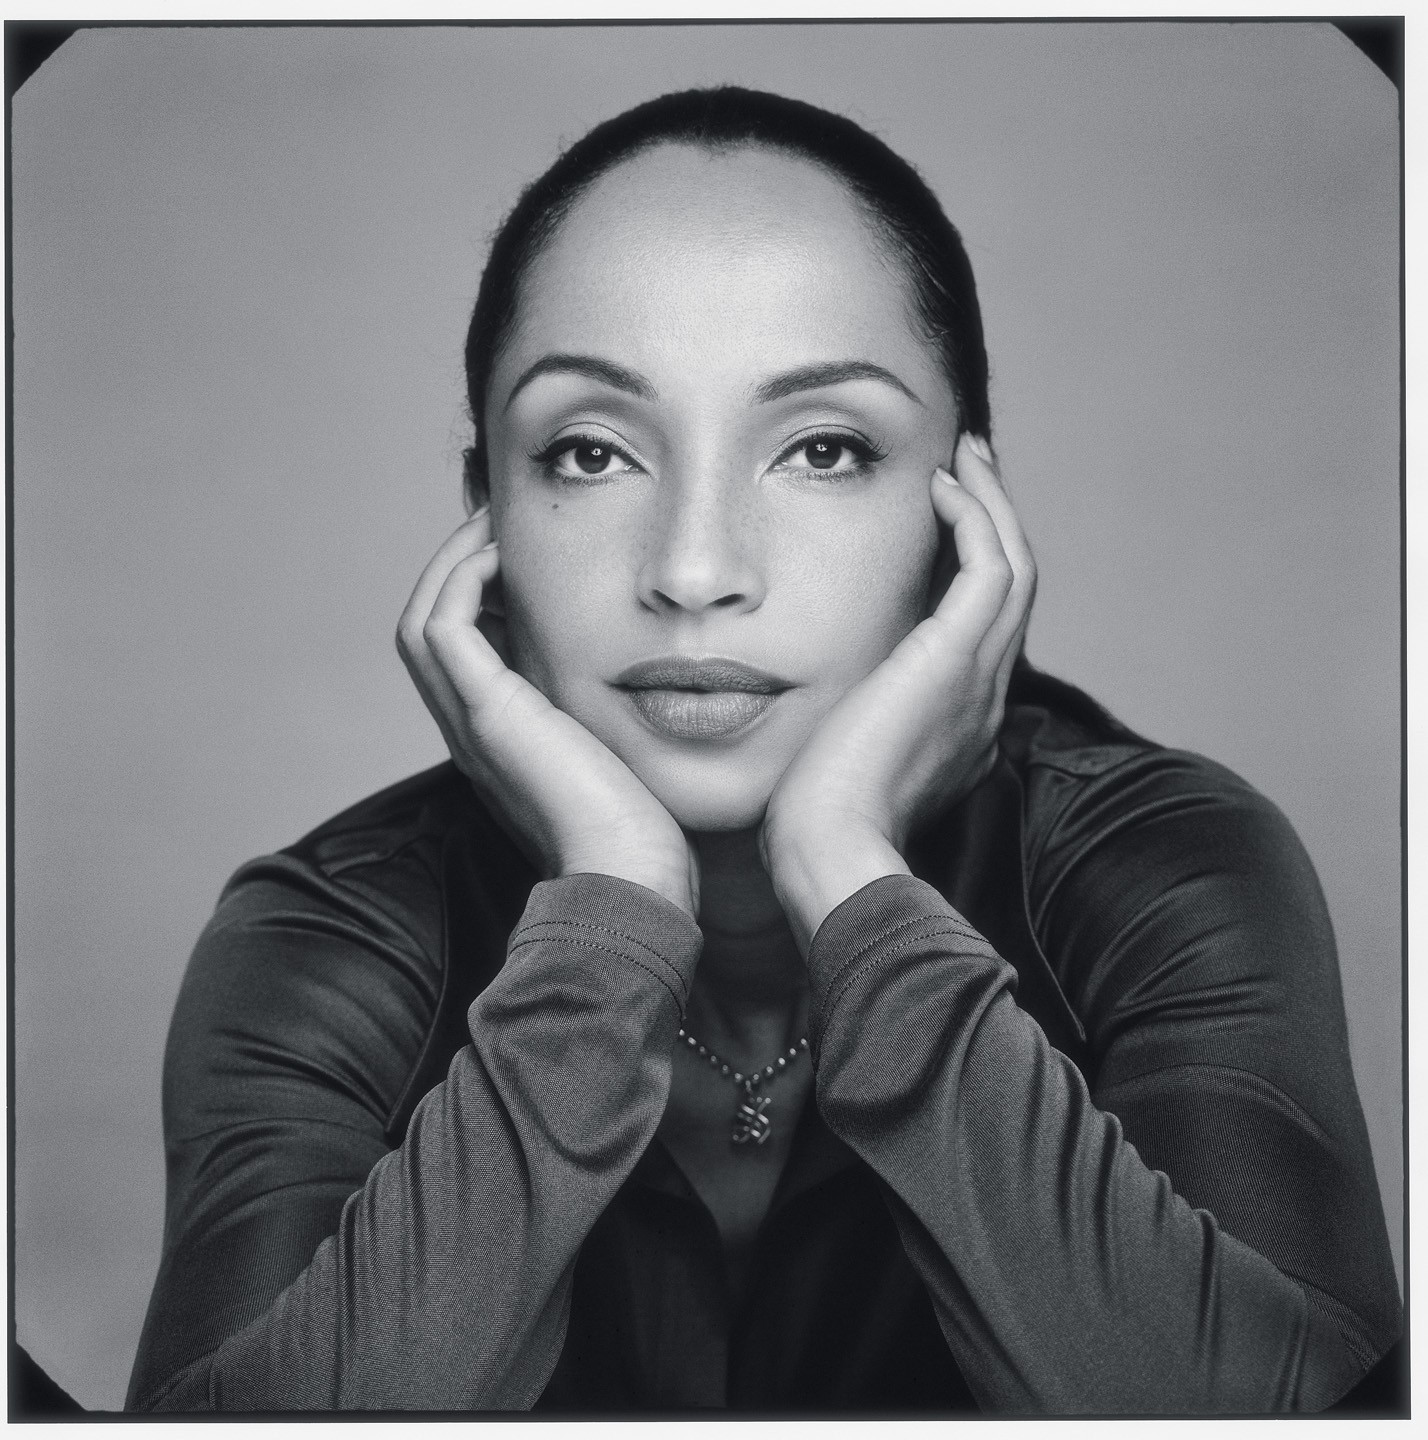 Sade S Complex Relationship With Fame Can Still Teach Us Something 15 Years Later The Fader